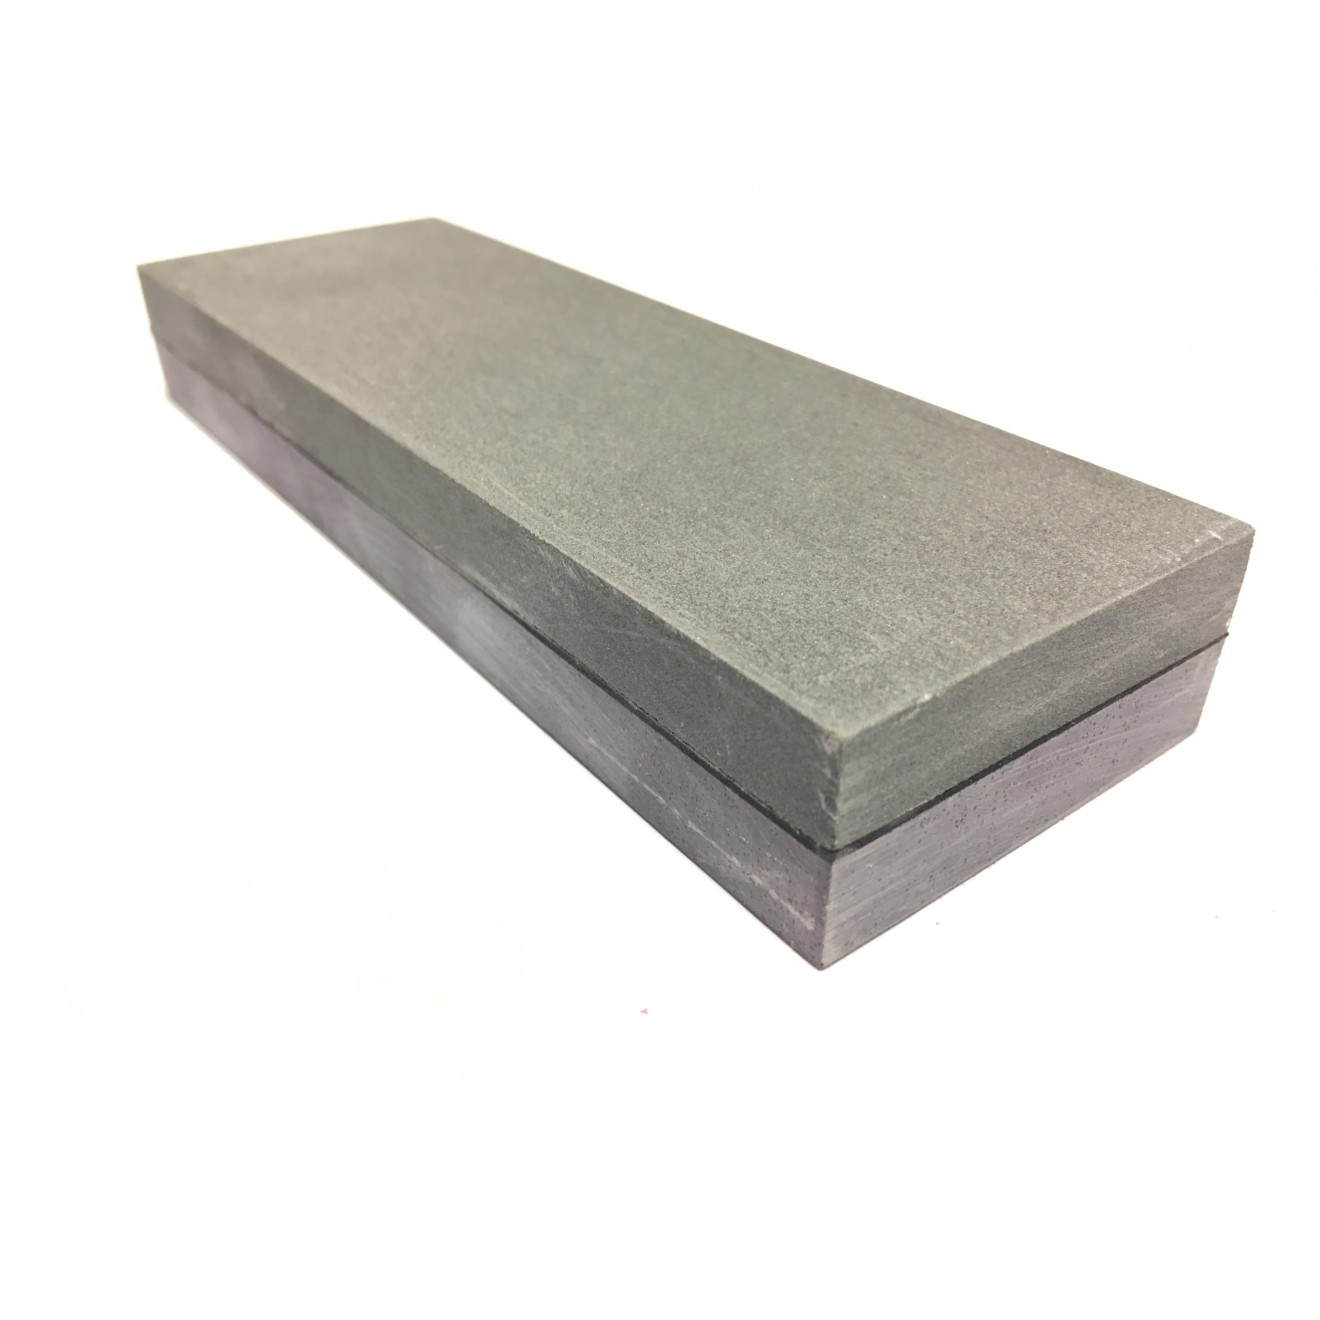 CotPyr 5.90 x 2.36 inch natural grindstone combined